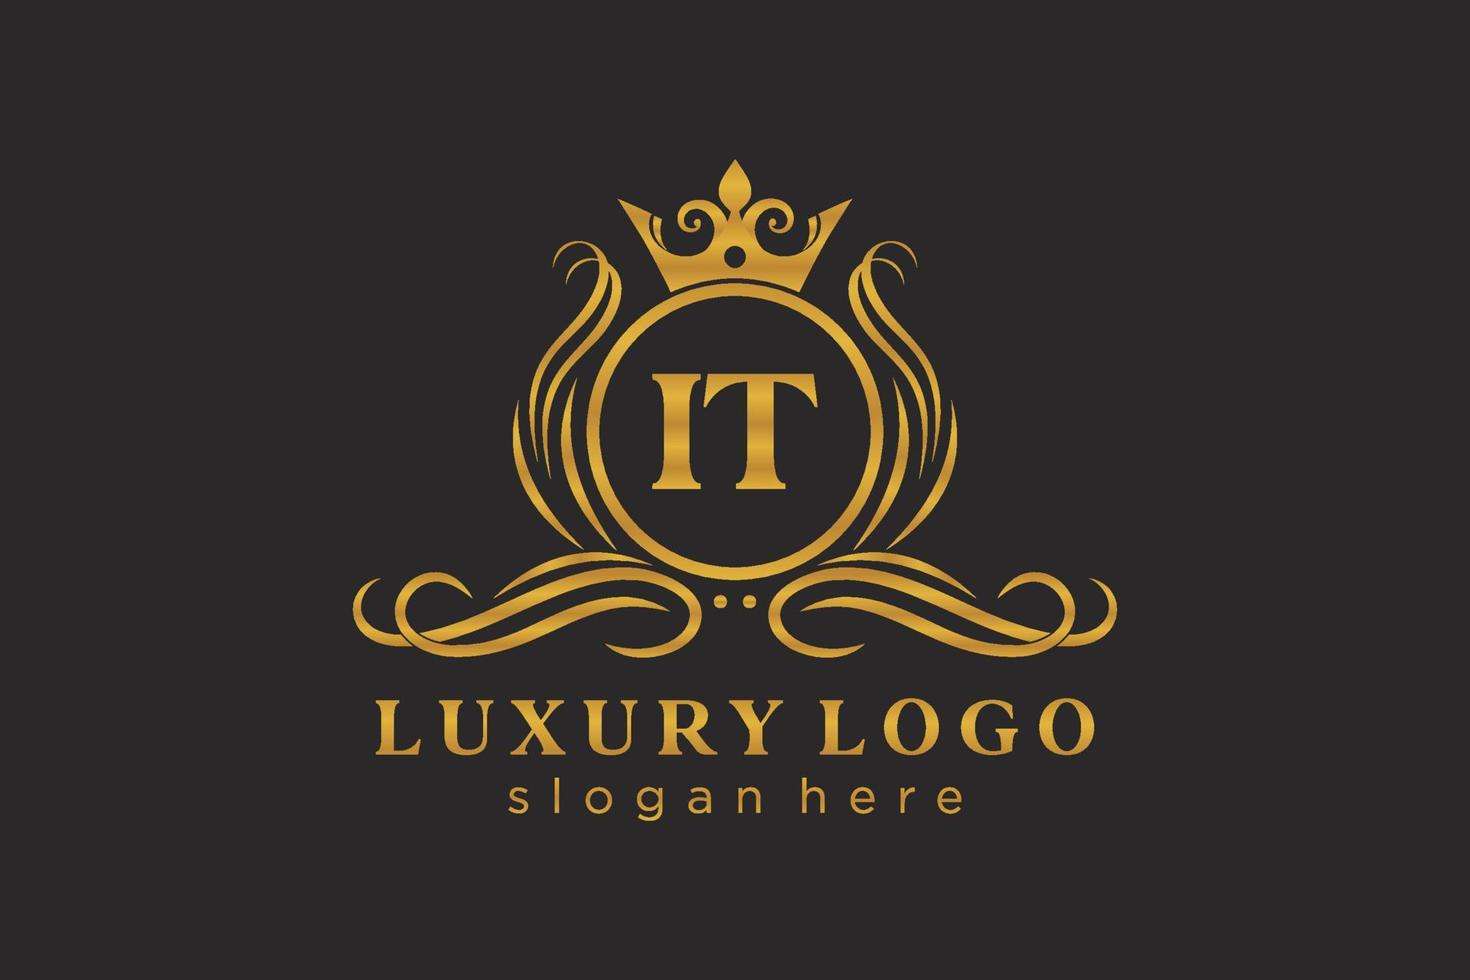 Initial IT Letter Royal Luxury Logo template in vector art for Restaurant, Royalty, Boutique, Cafe, Hotel, Heraldic, Jewelry, Fashion and other vector illustration.